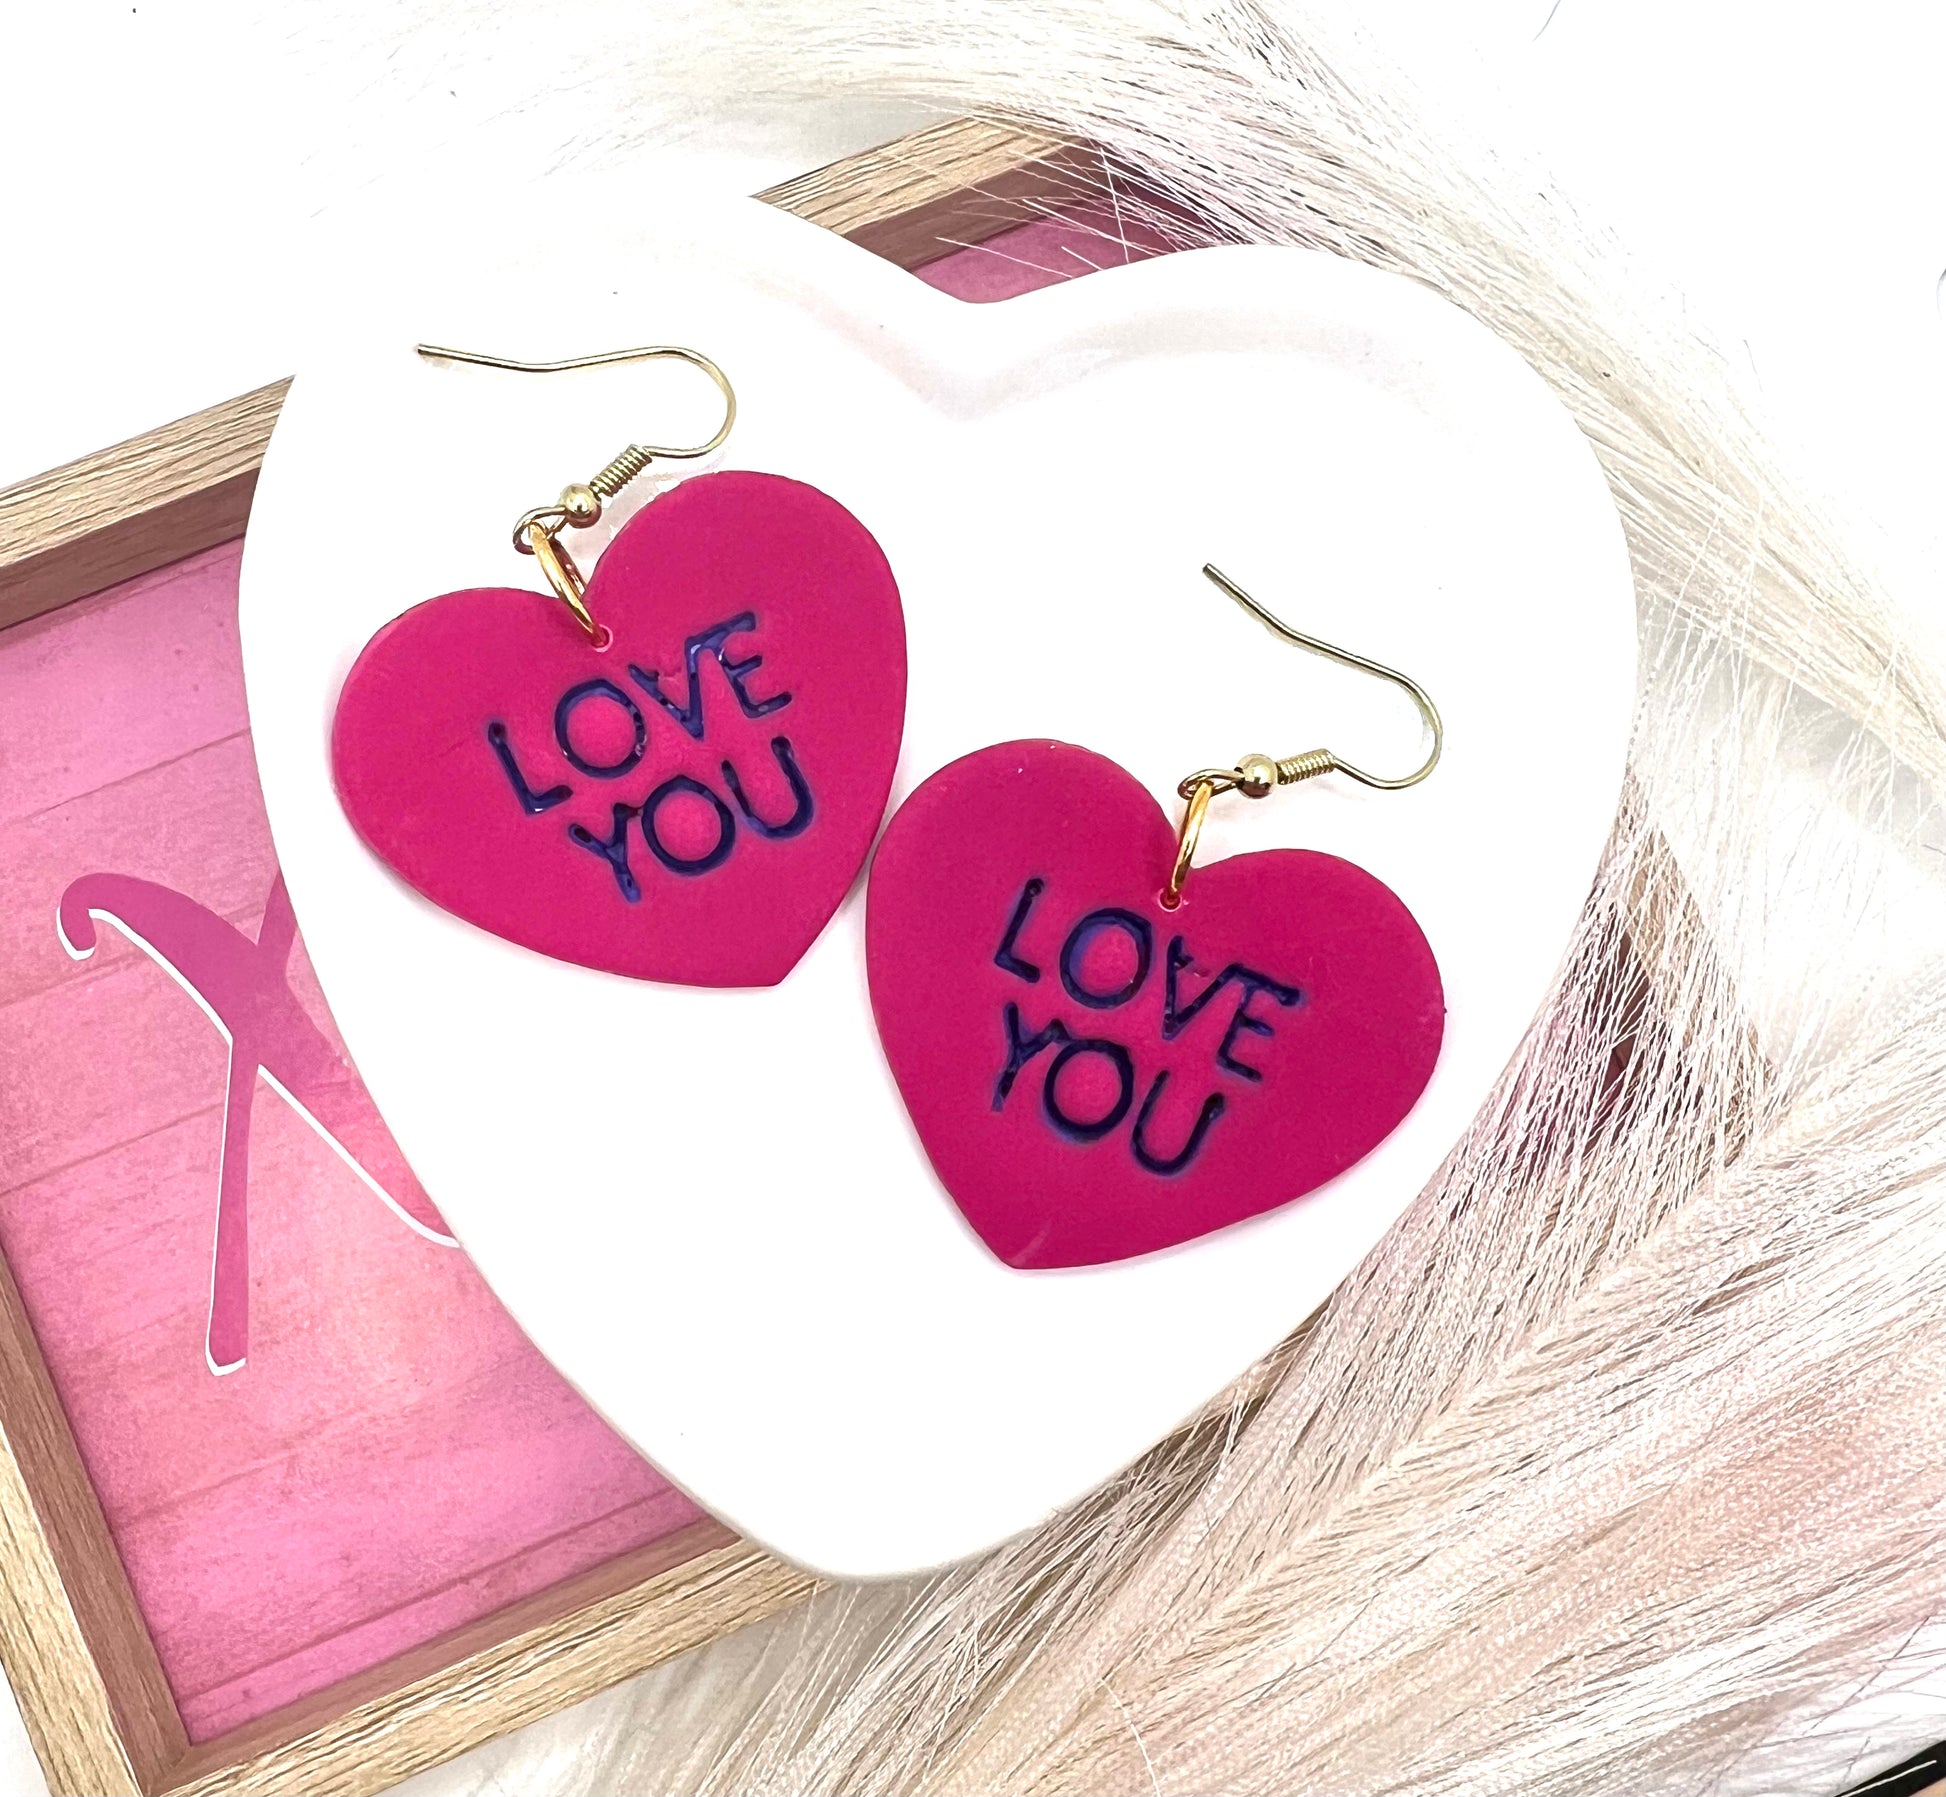 heart shaped earrings with love you stamped in purple.  they are on gold fish hook style earrings.